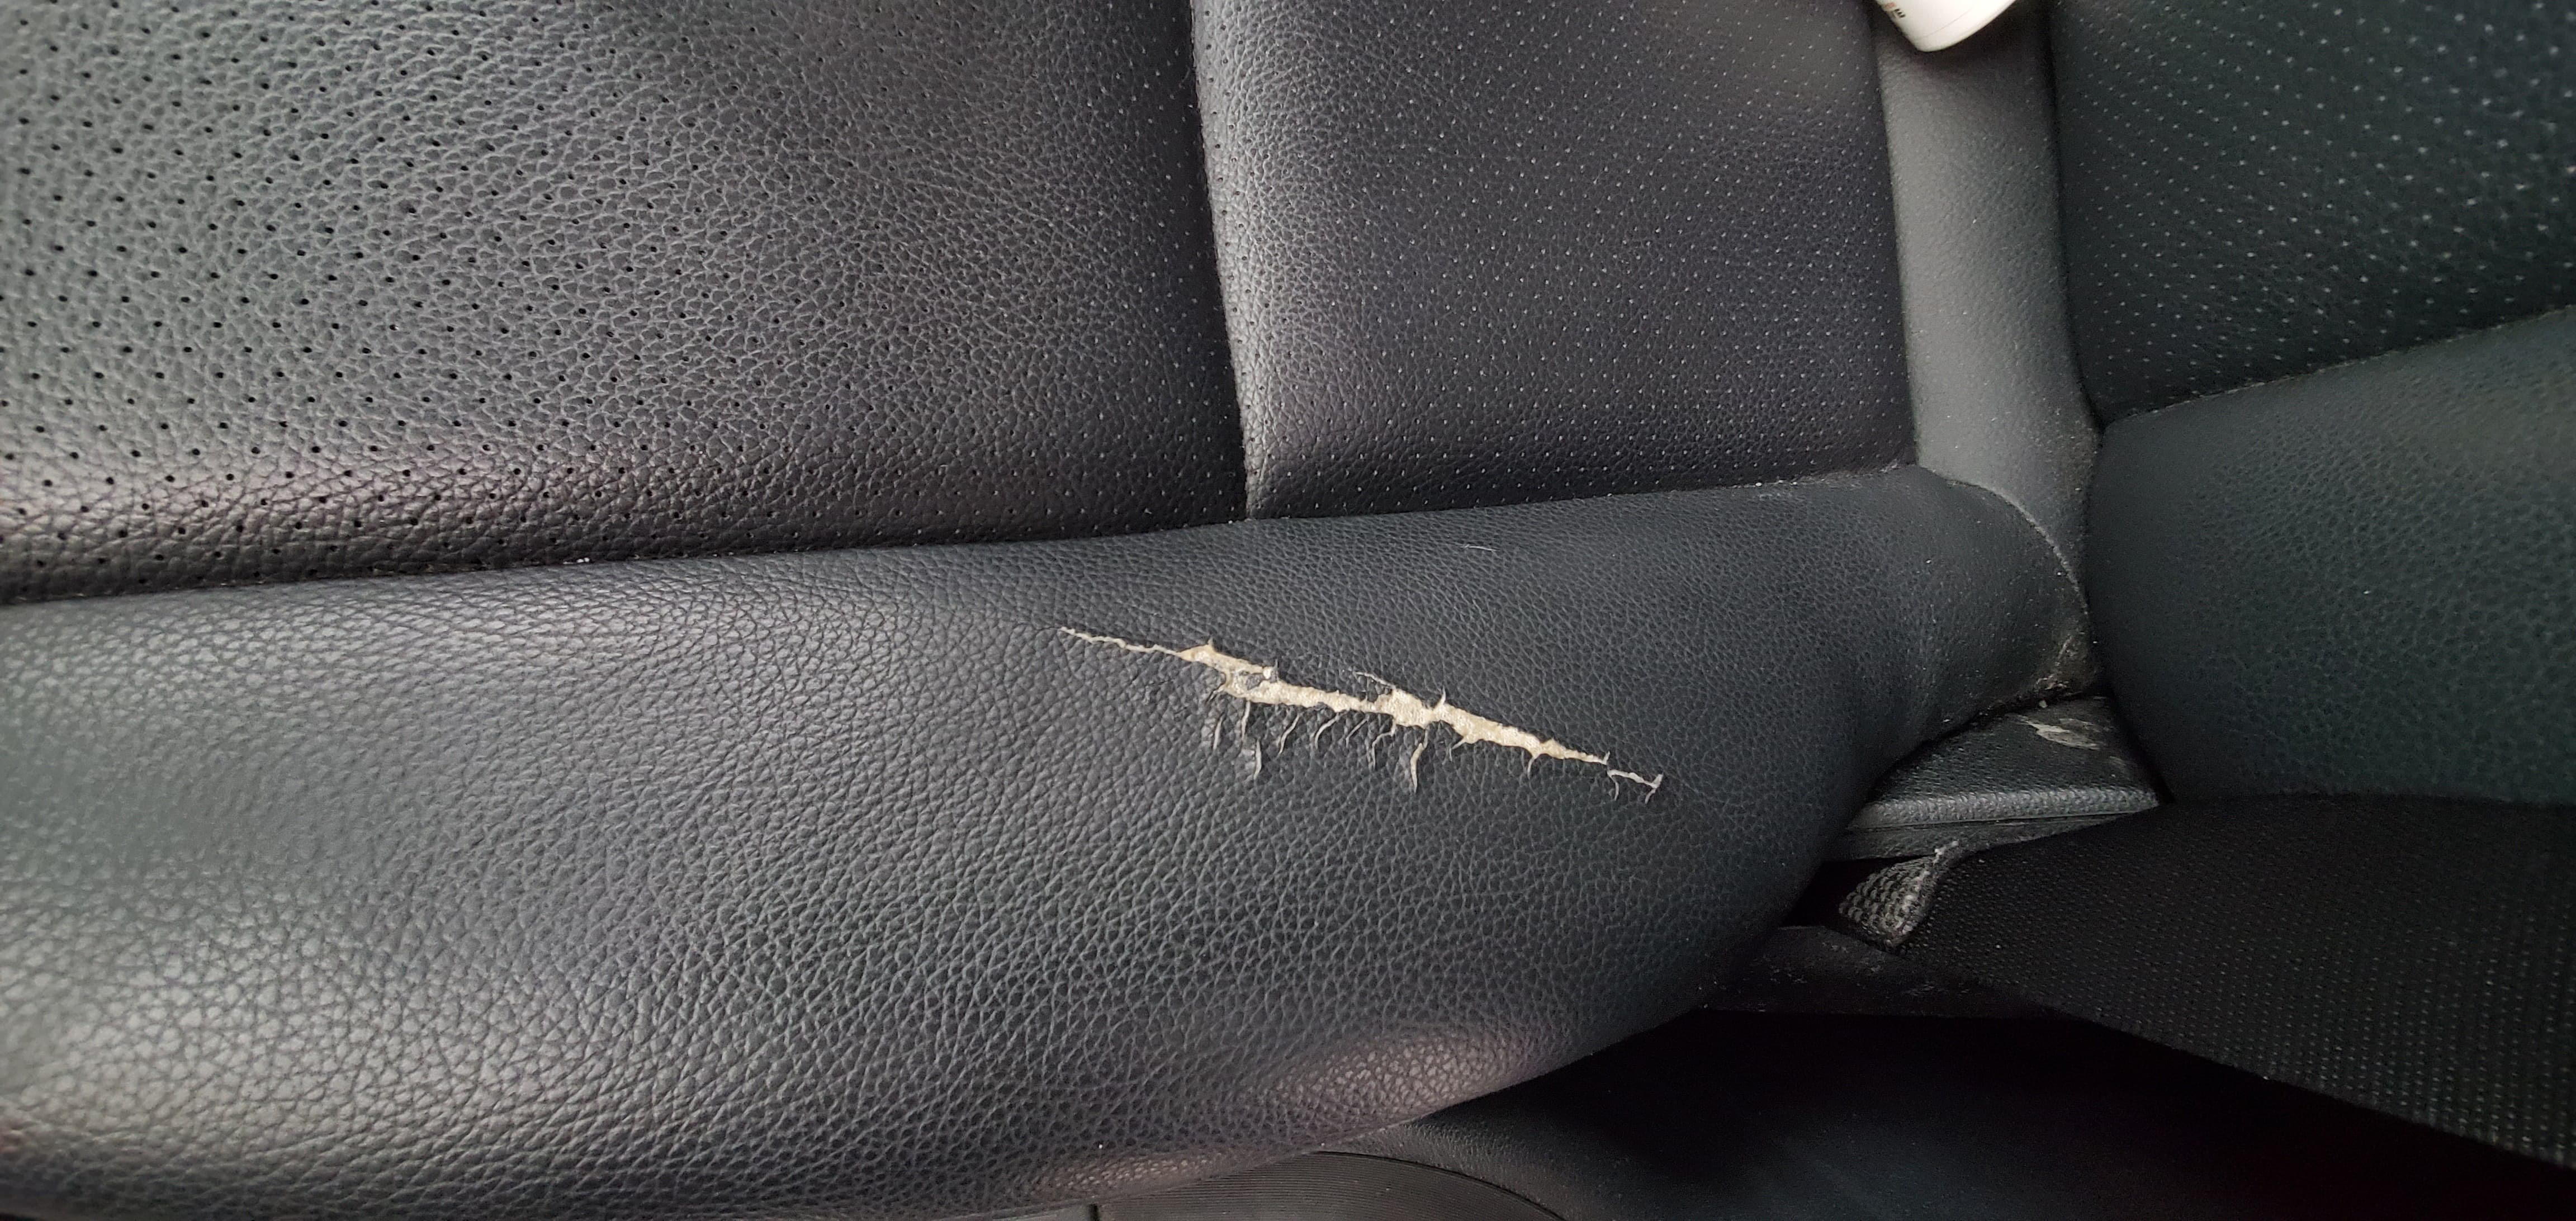 How To Repair A Leather Car Seat - How To Fix Tear In Leather Seat